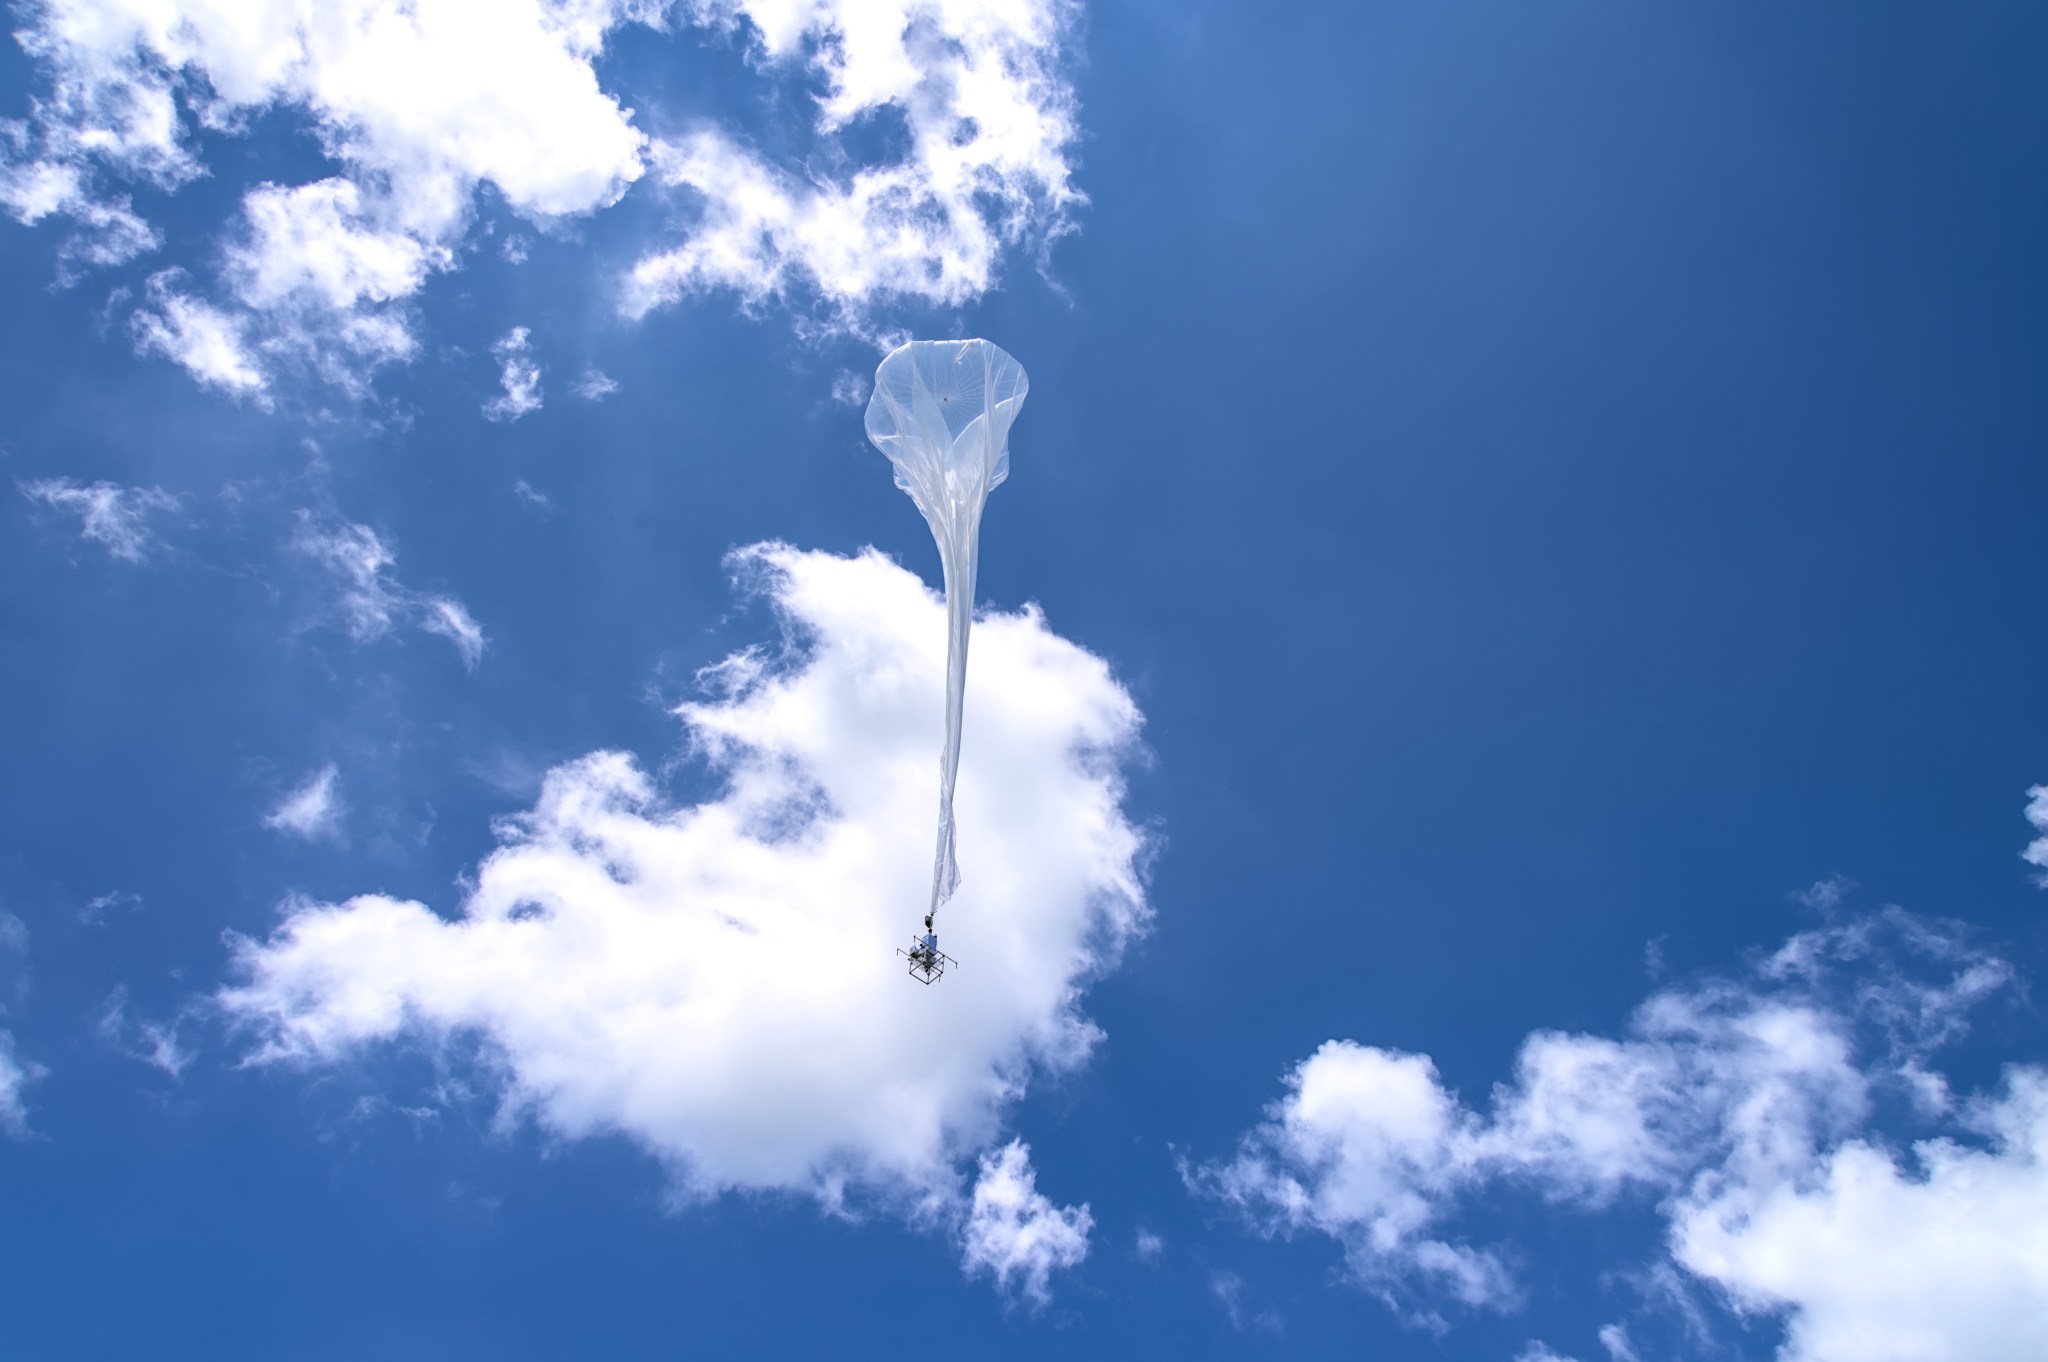 Bronco Ember, a wildfire detection system being developed by Bronco Space – the aerospace club at Cal Poly Pomona – undergoes testing on an Aerostar high-altitude balloon on July 8, 2022.